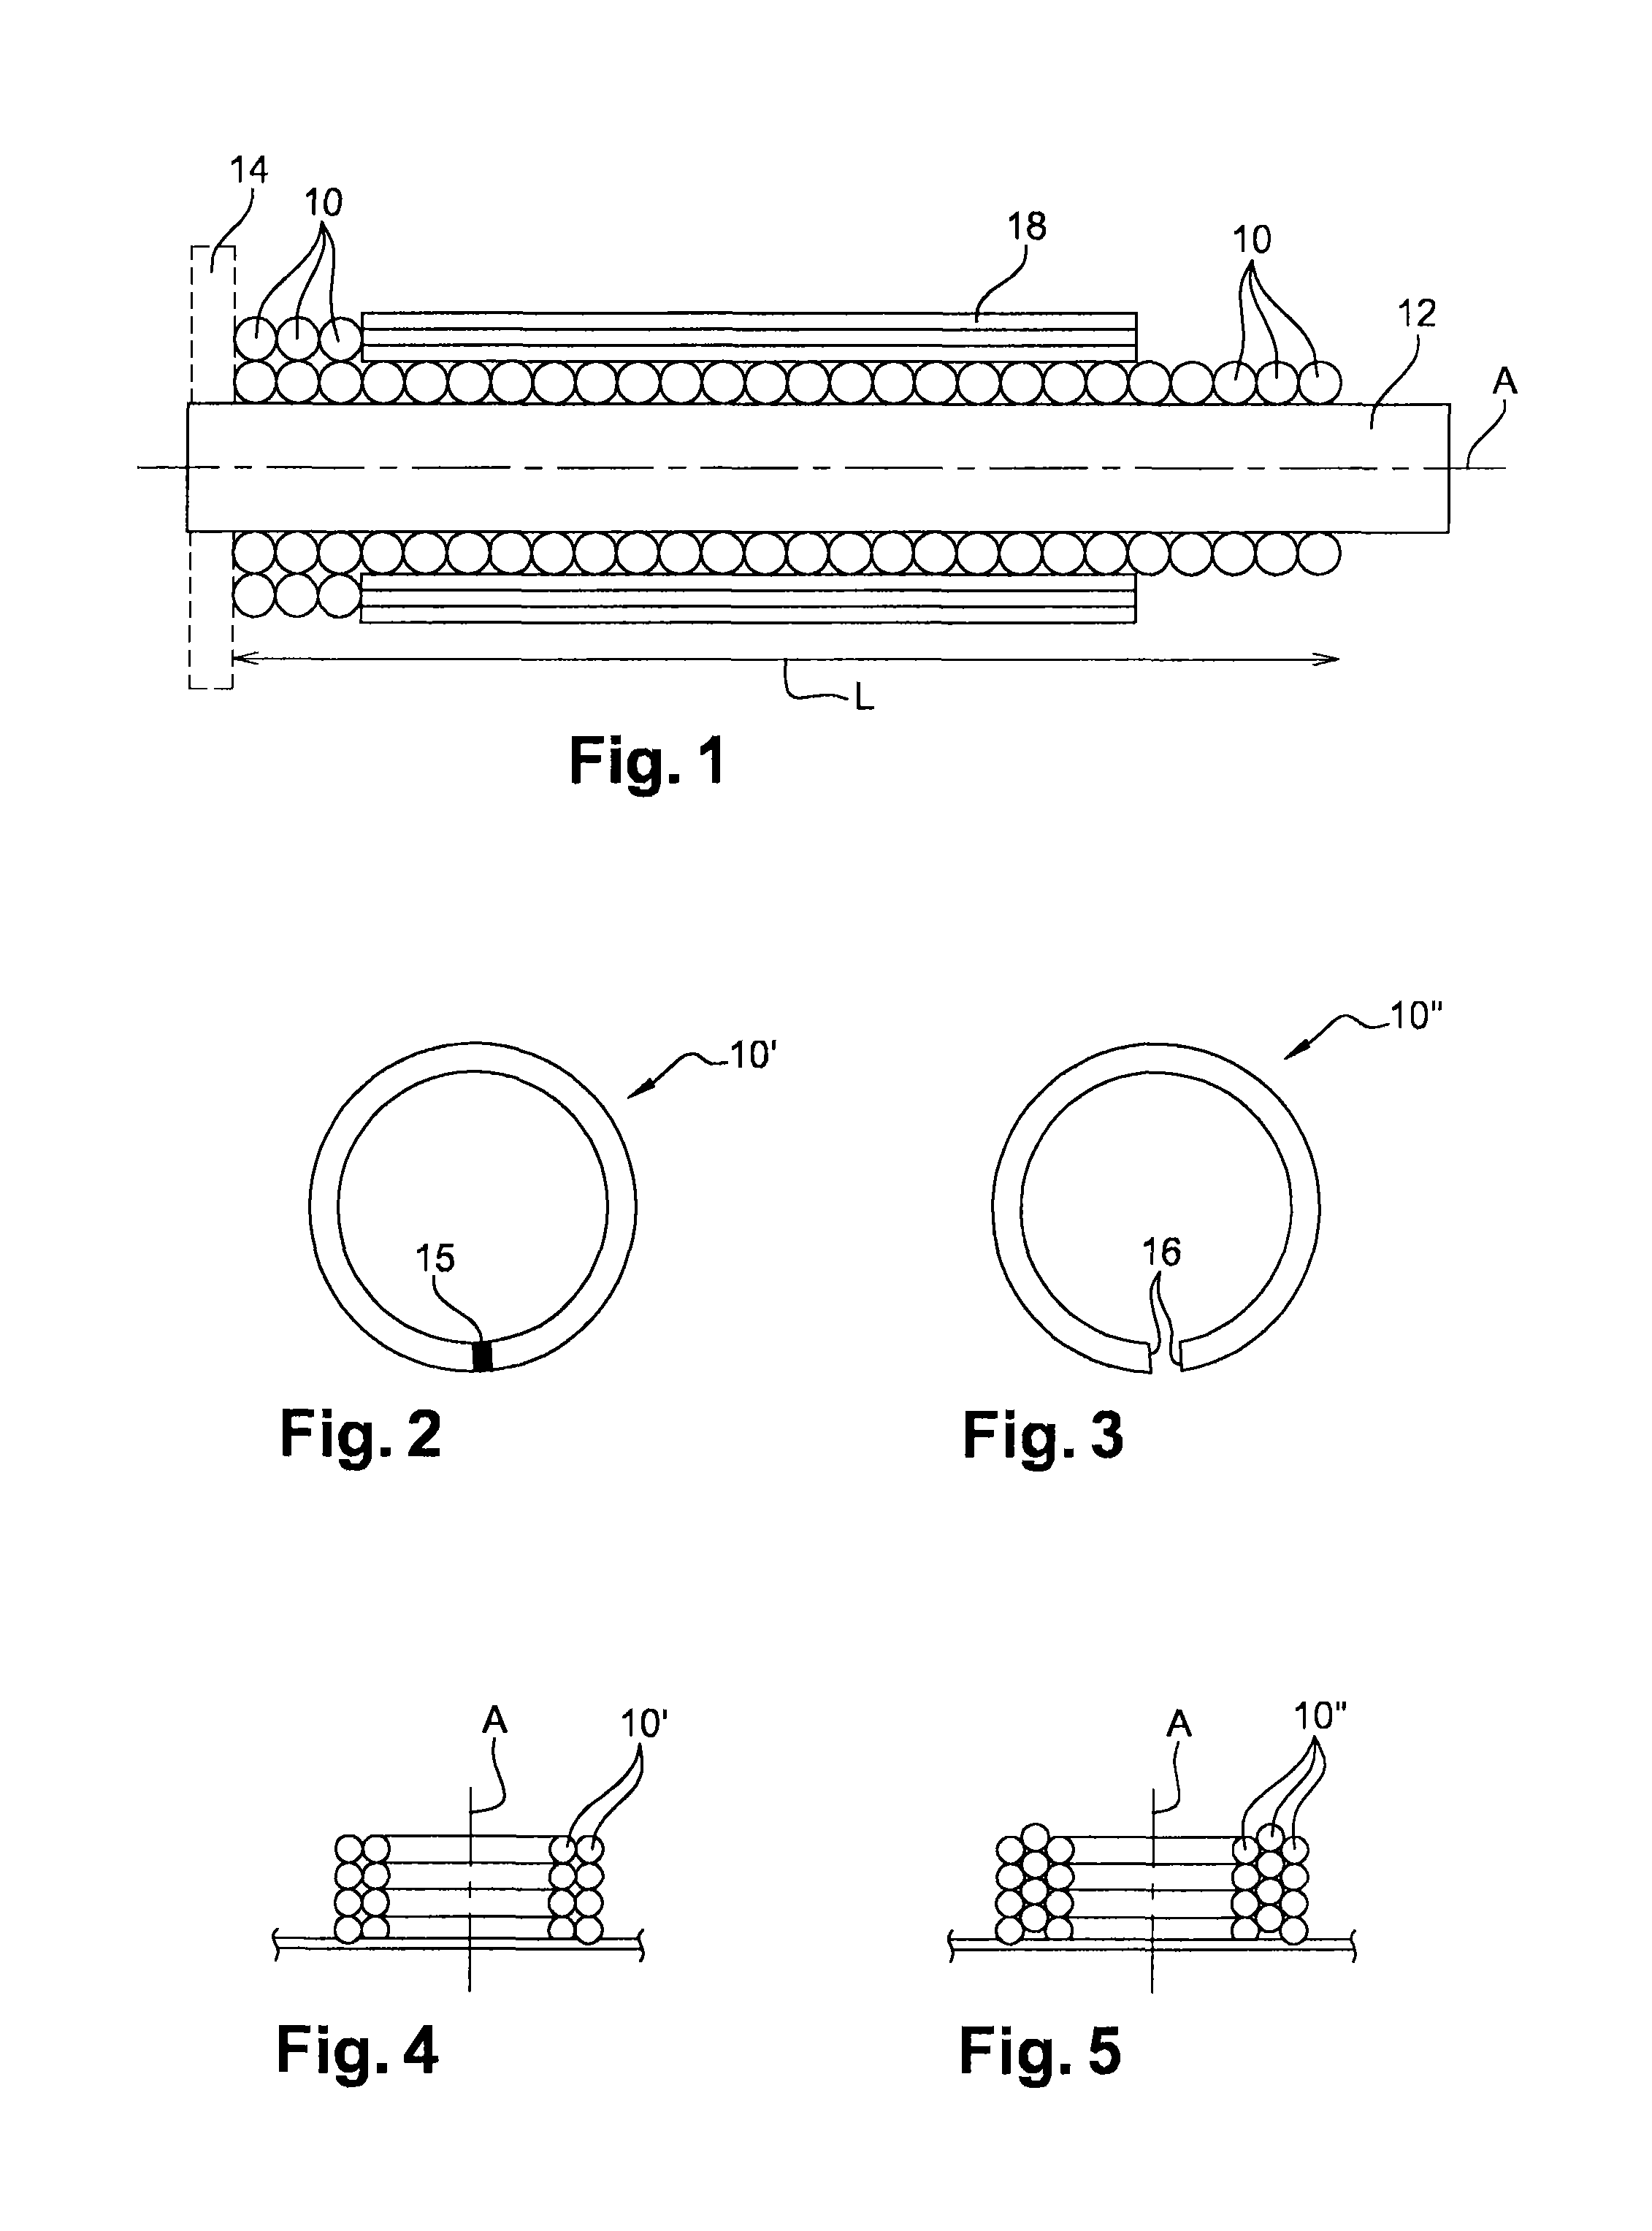 Method for fabricating a single-piece part for a turbine engine by diffusion bonding